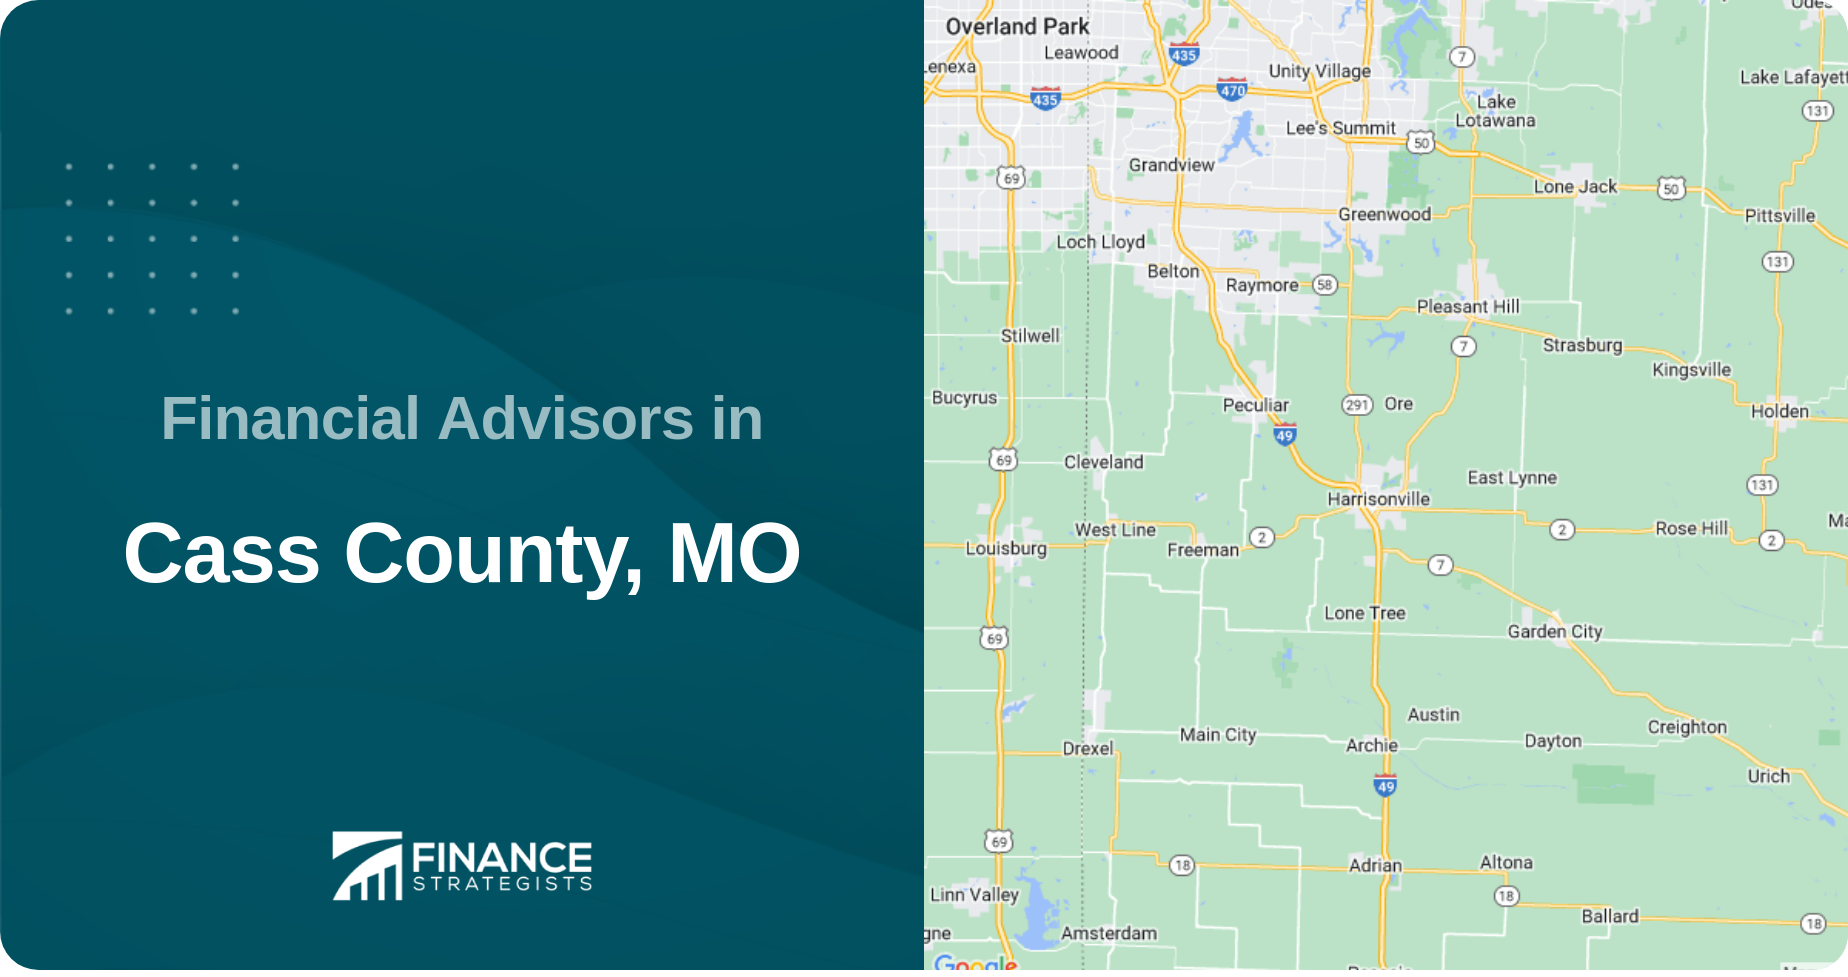 Financial Advisors in Cass County, MO